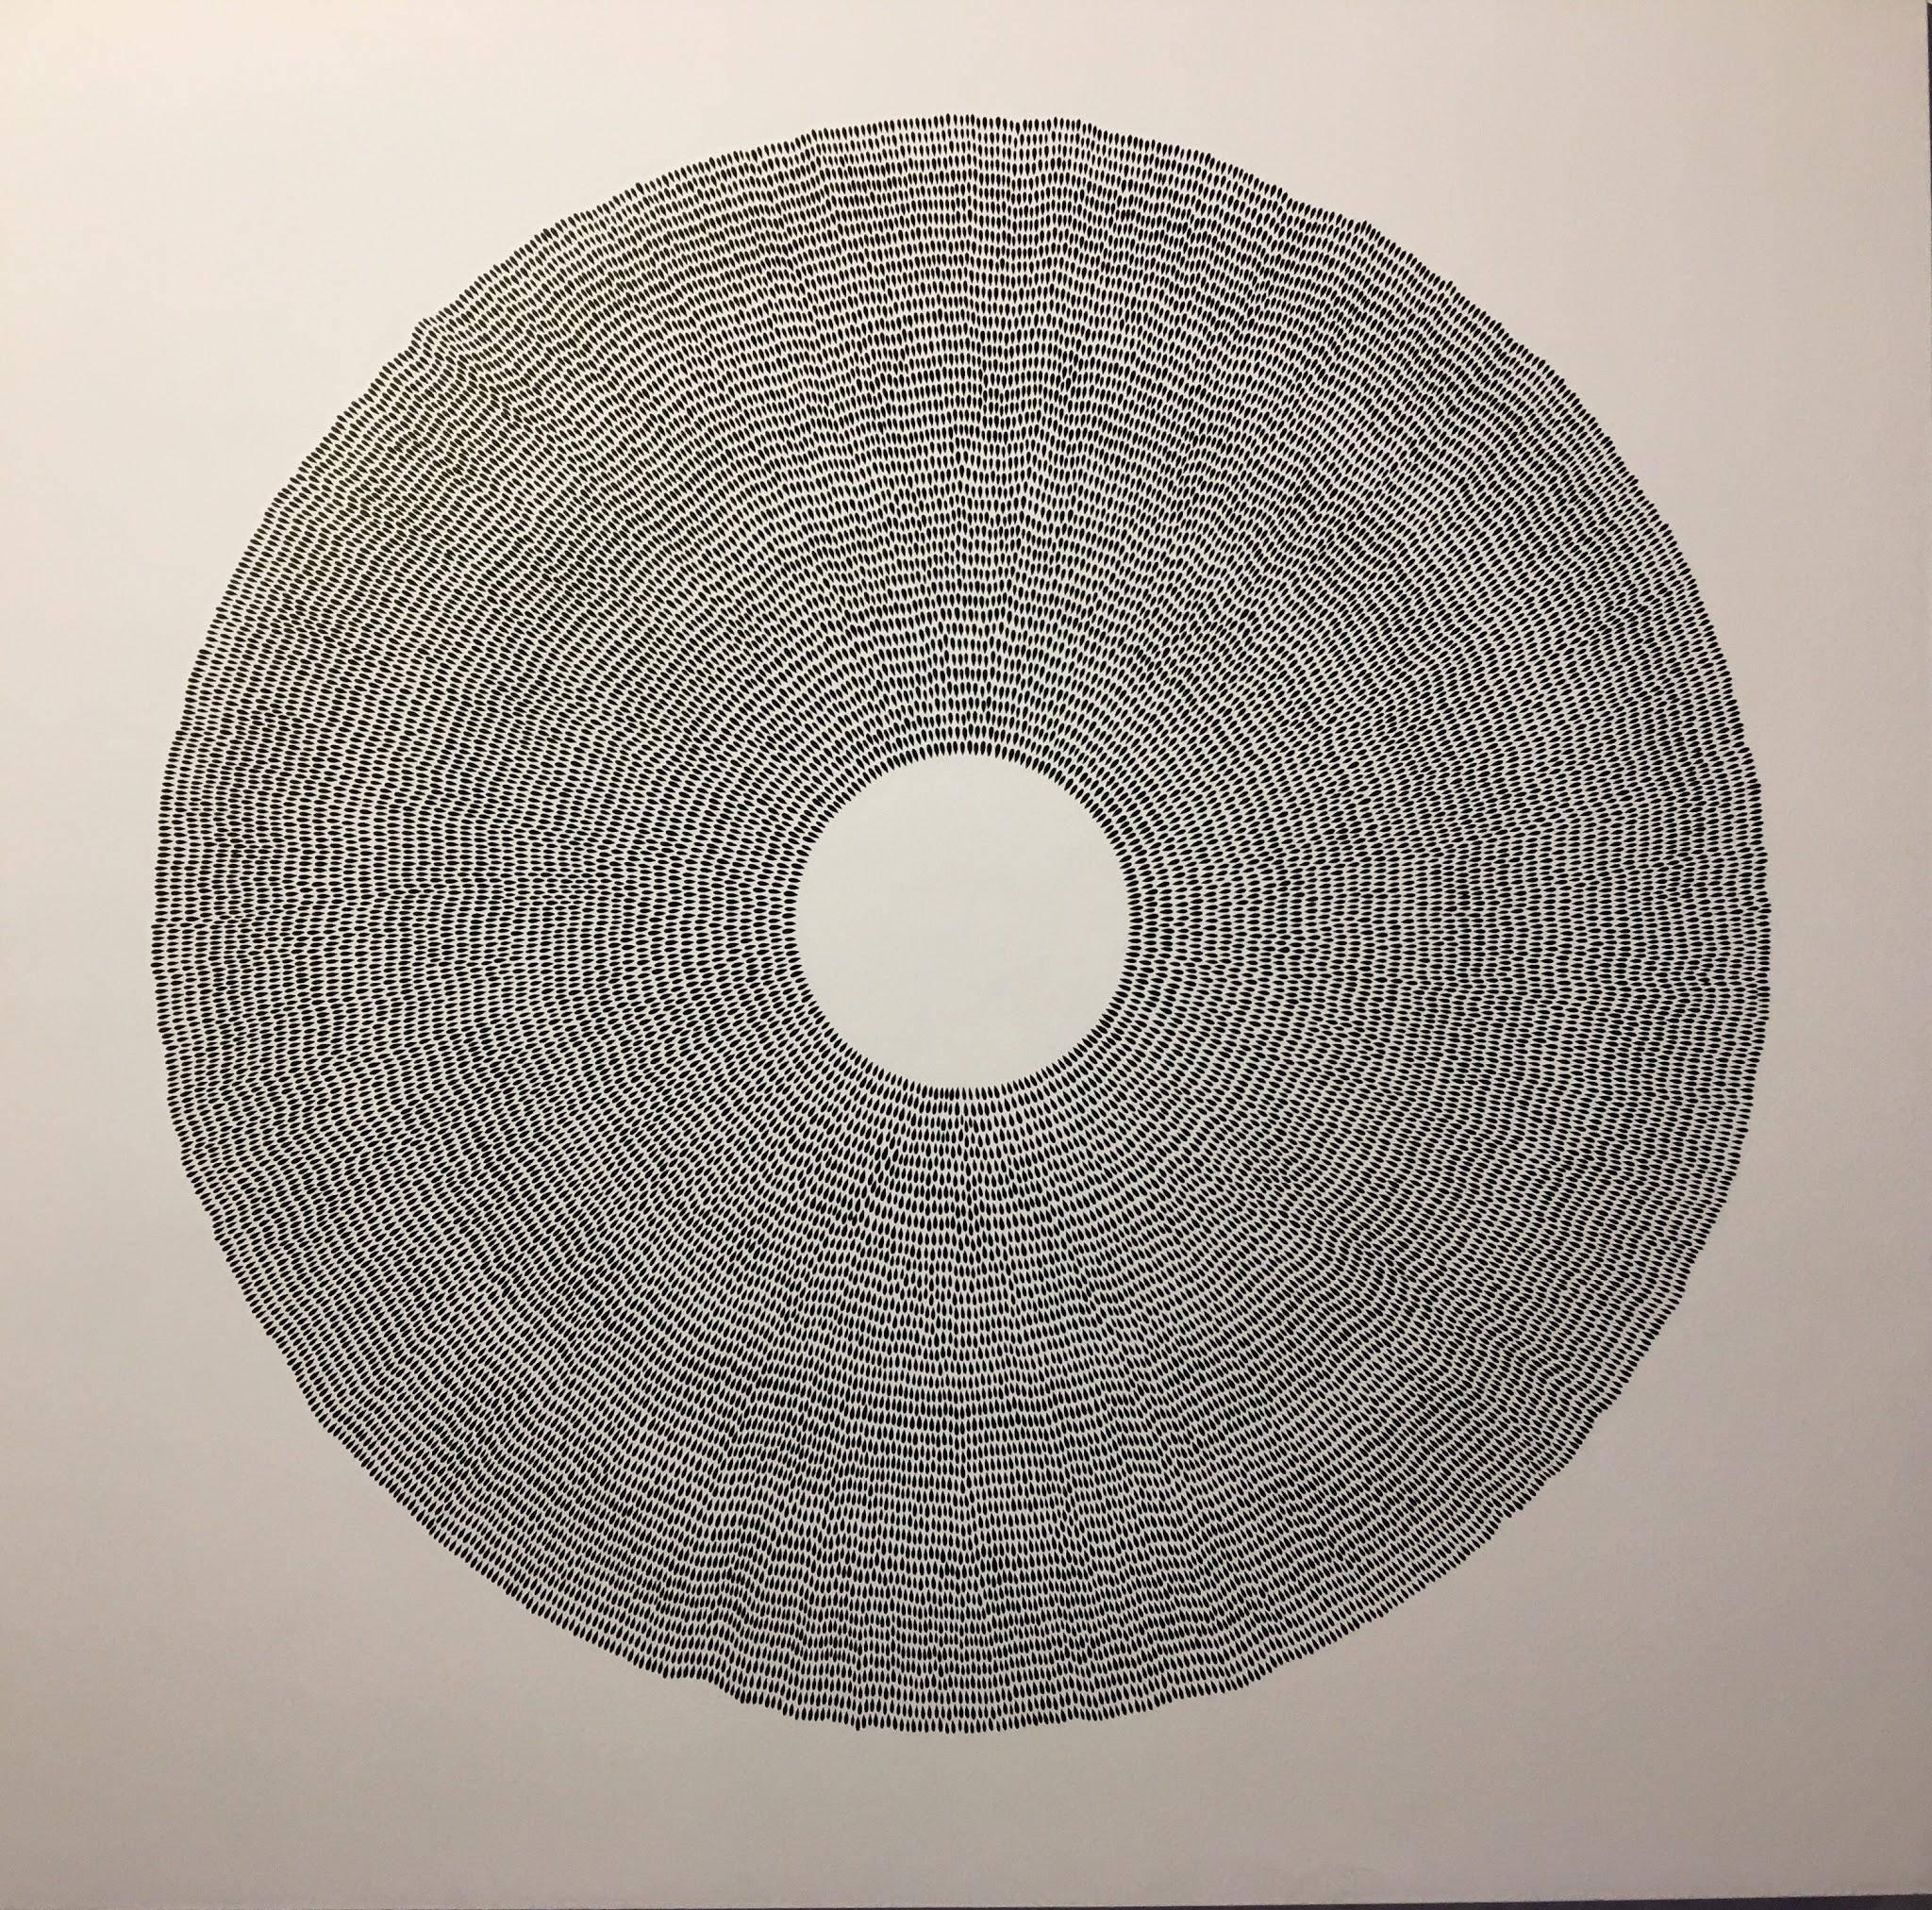 Starbirth III, Halsey Chait, Abstract Drawing, Circle, Black, White